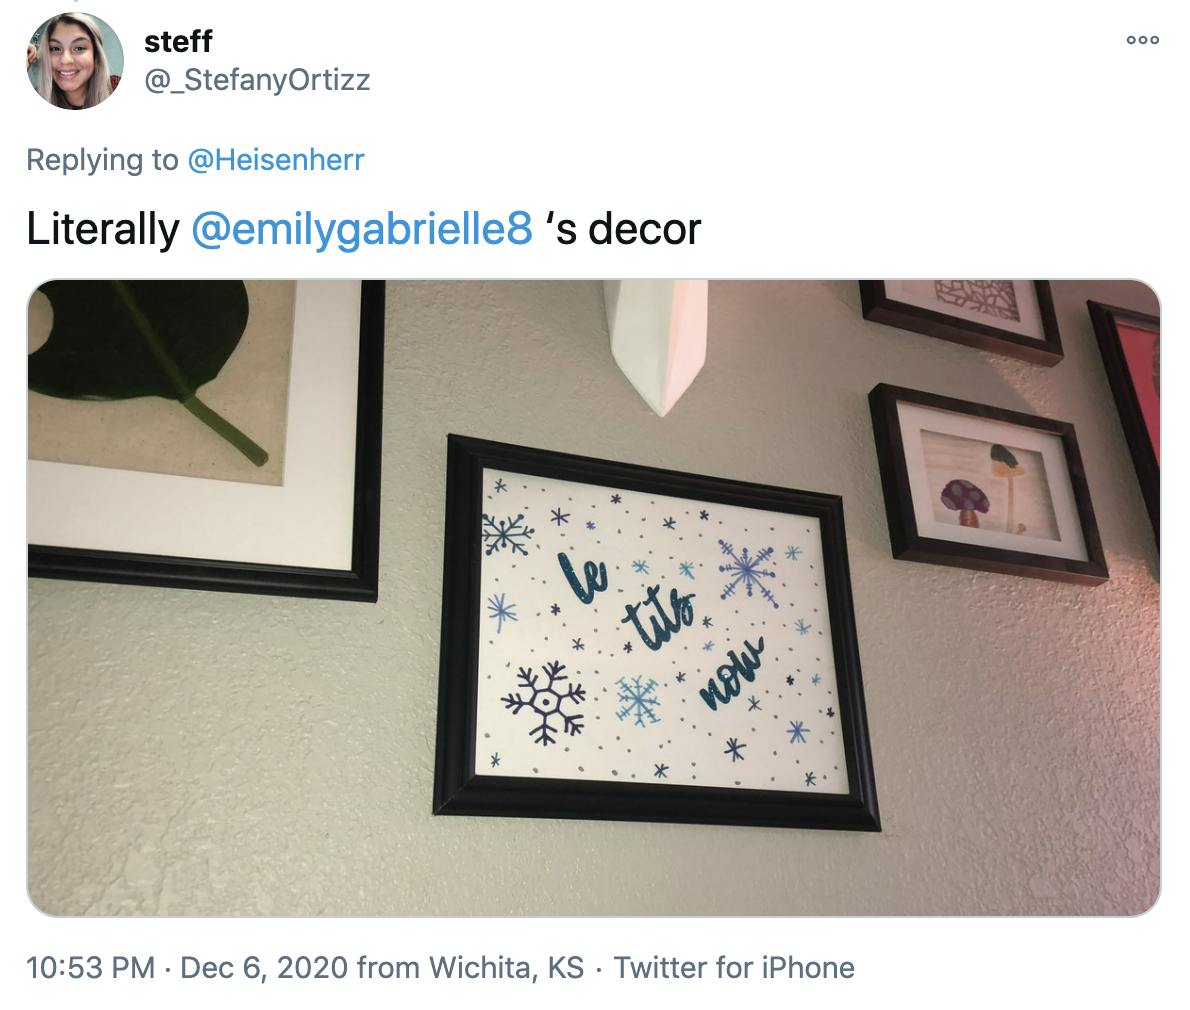 'Literally @emilygabrielle8 ‘s decor' a framed piece of art featuring snowflakes and the words le tits now in blue